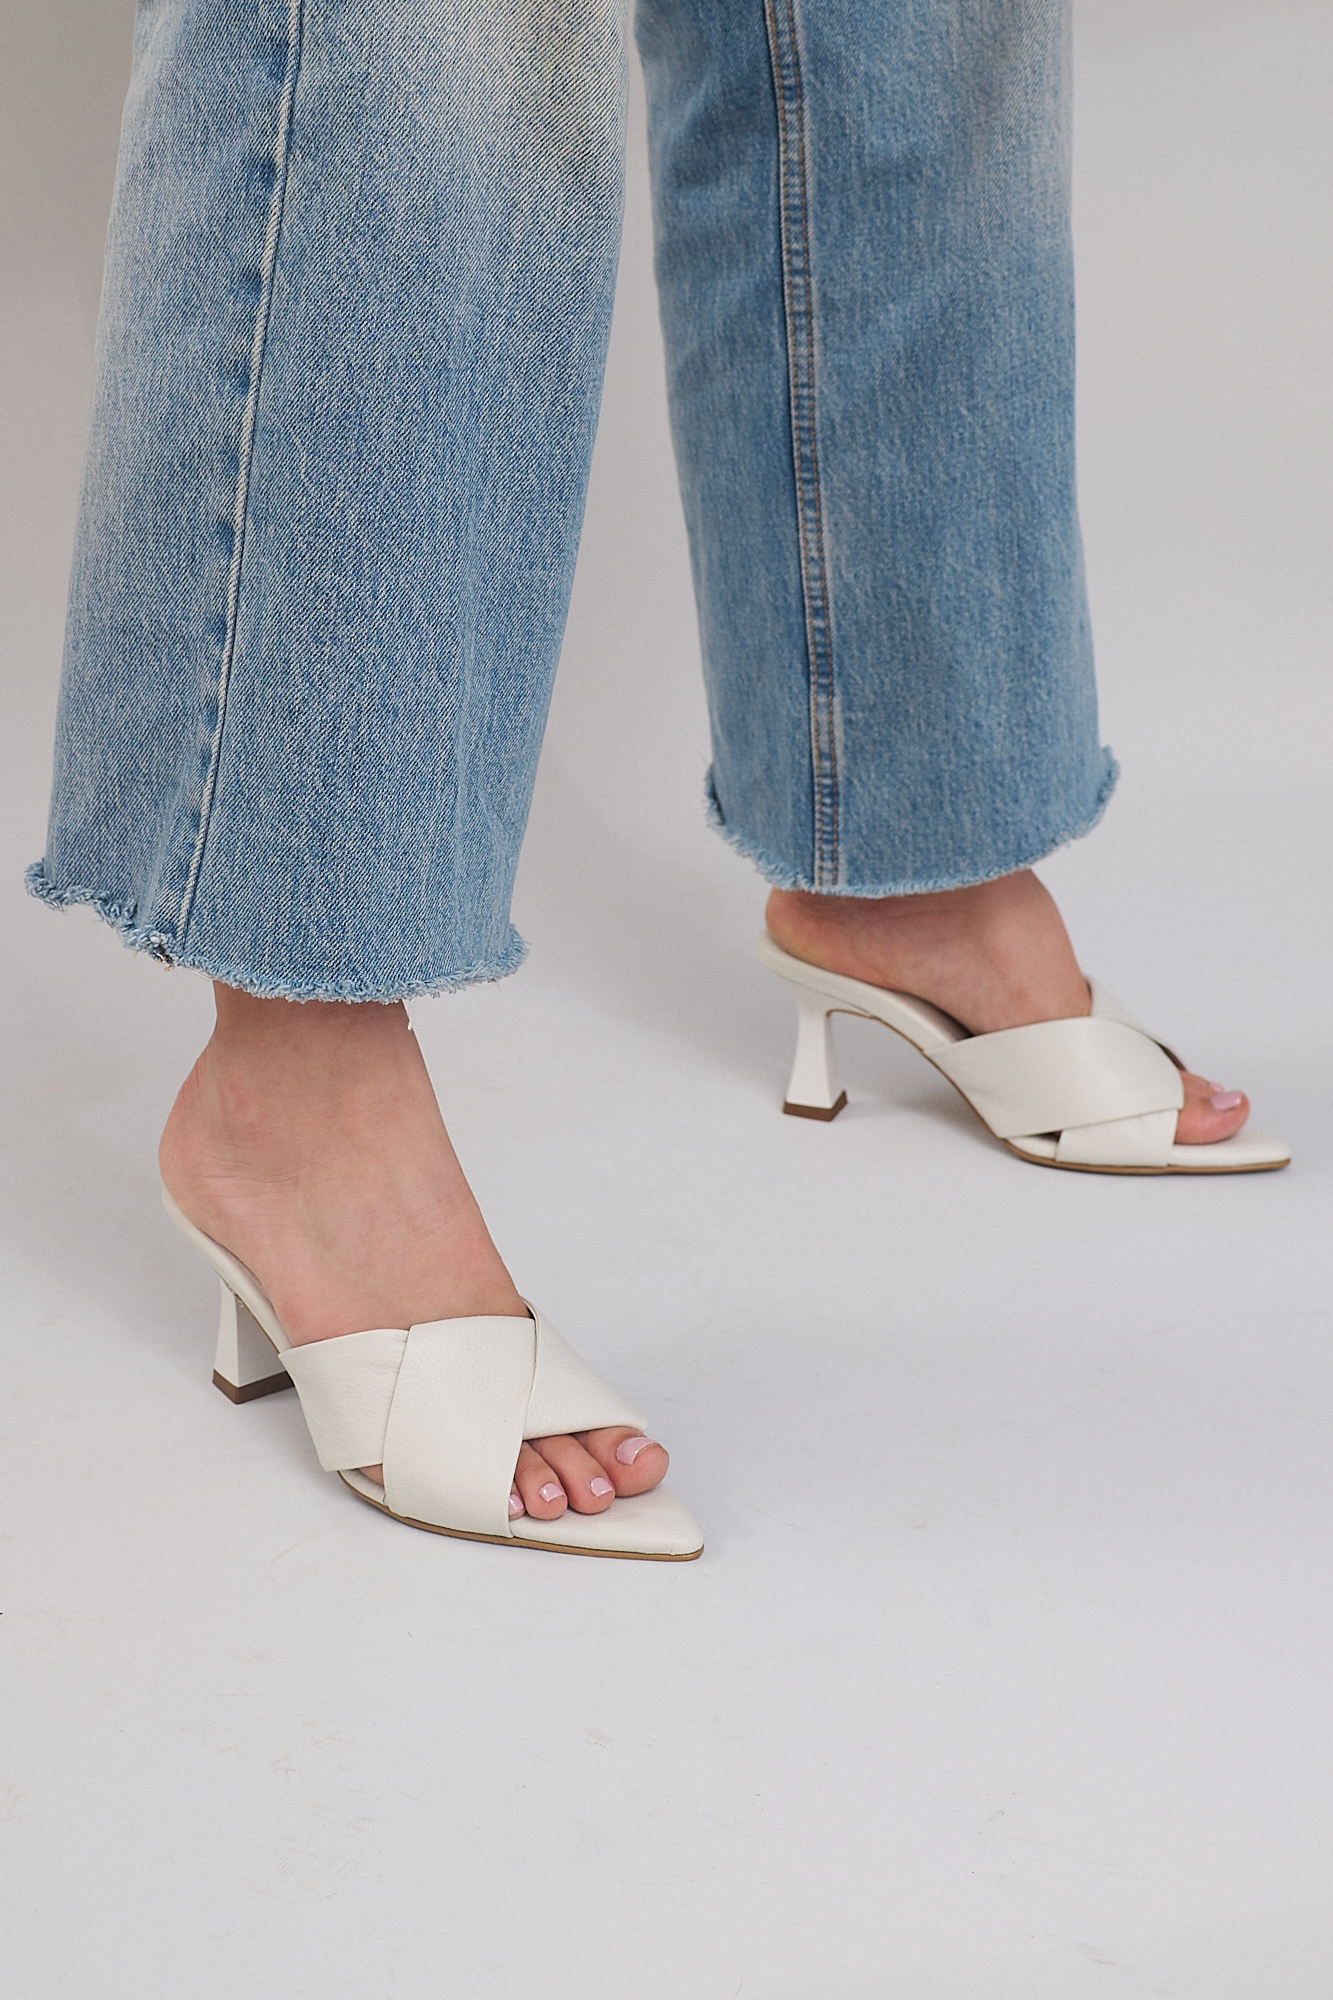 girl with blue jeans wearing white pumps from emilia merz